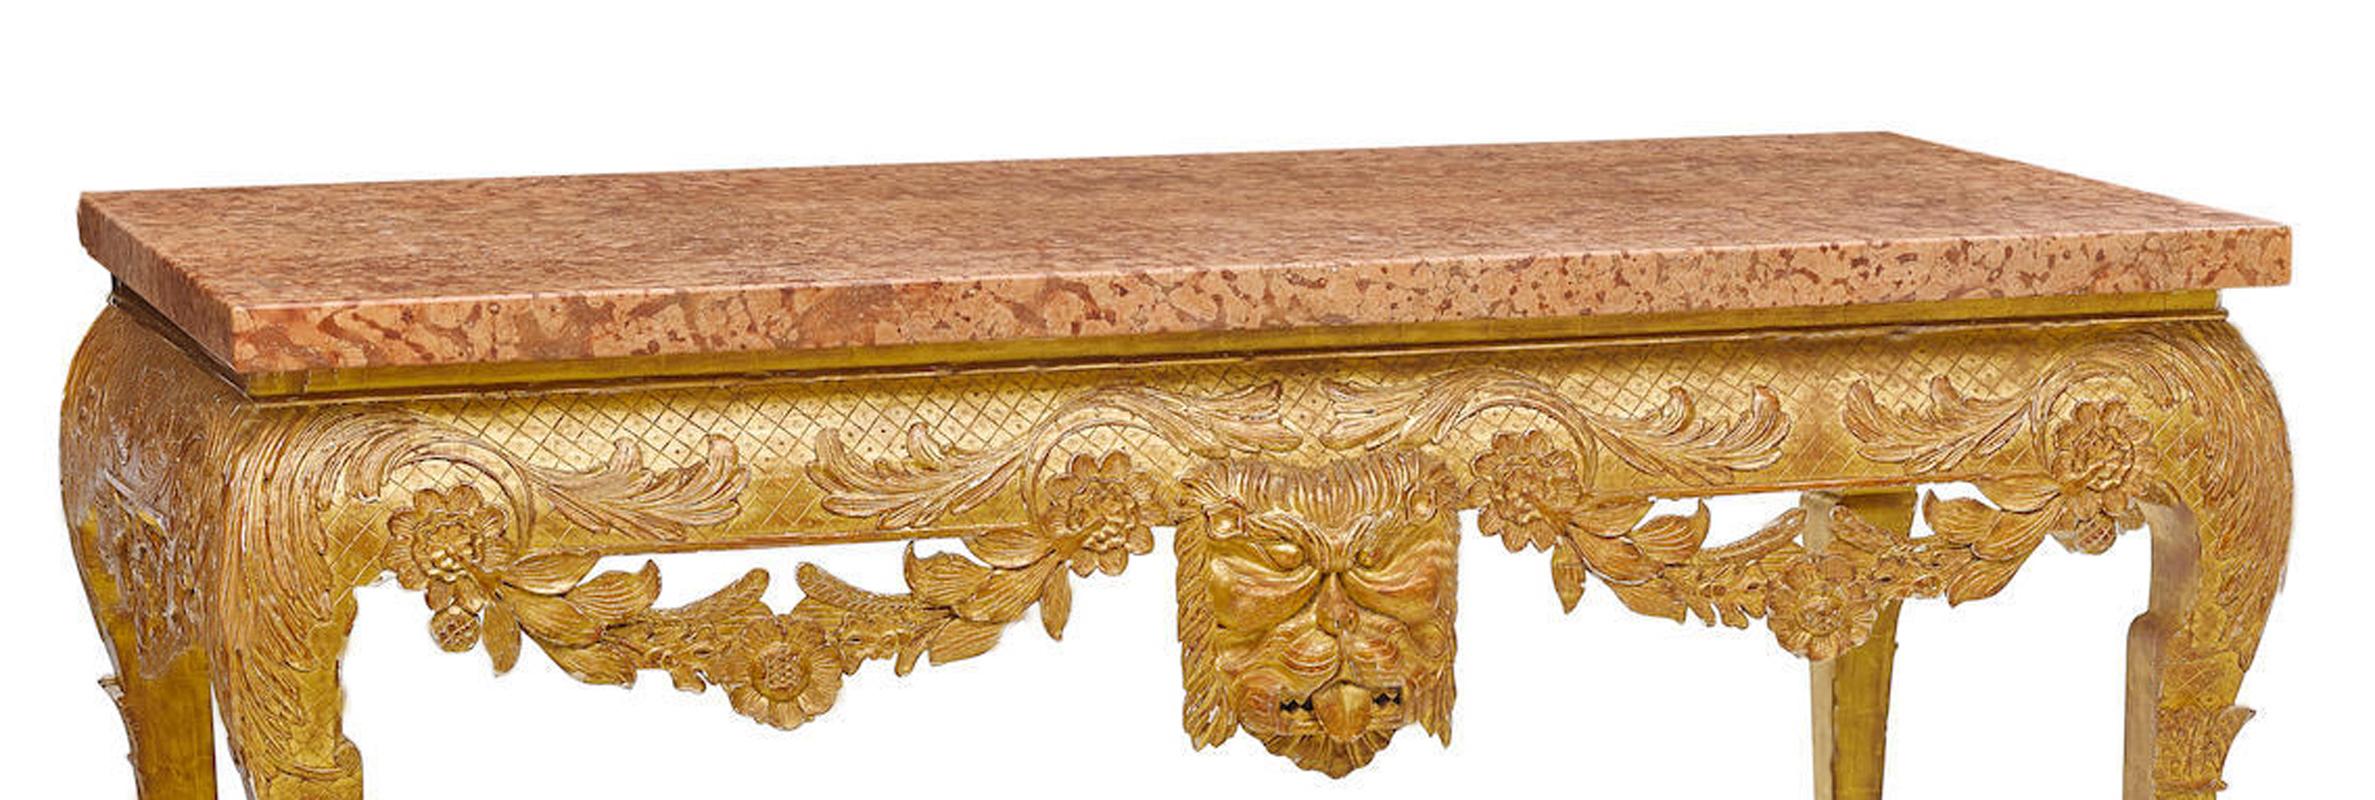 English George II Style Carved Giltwood Console with Thick Marble